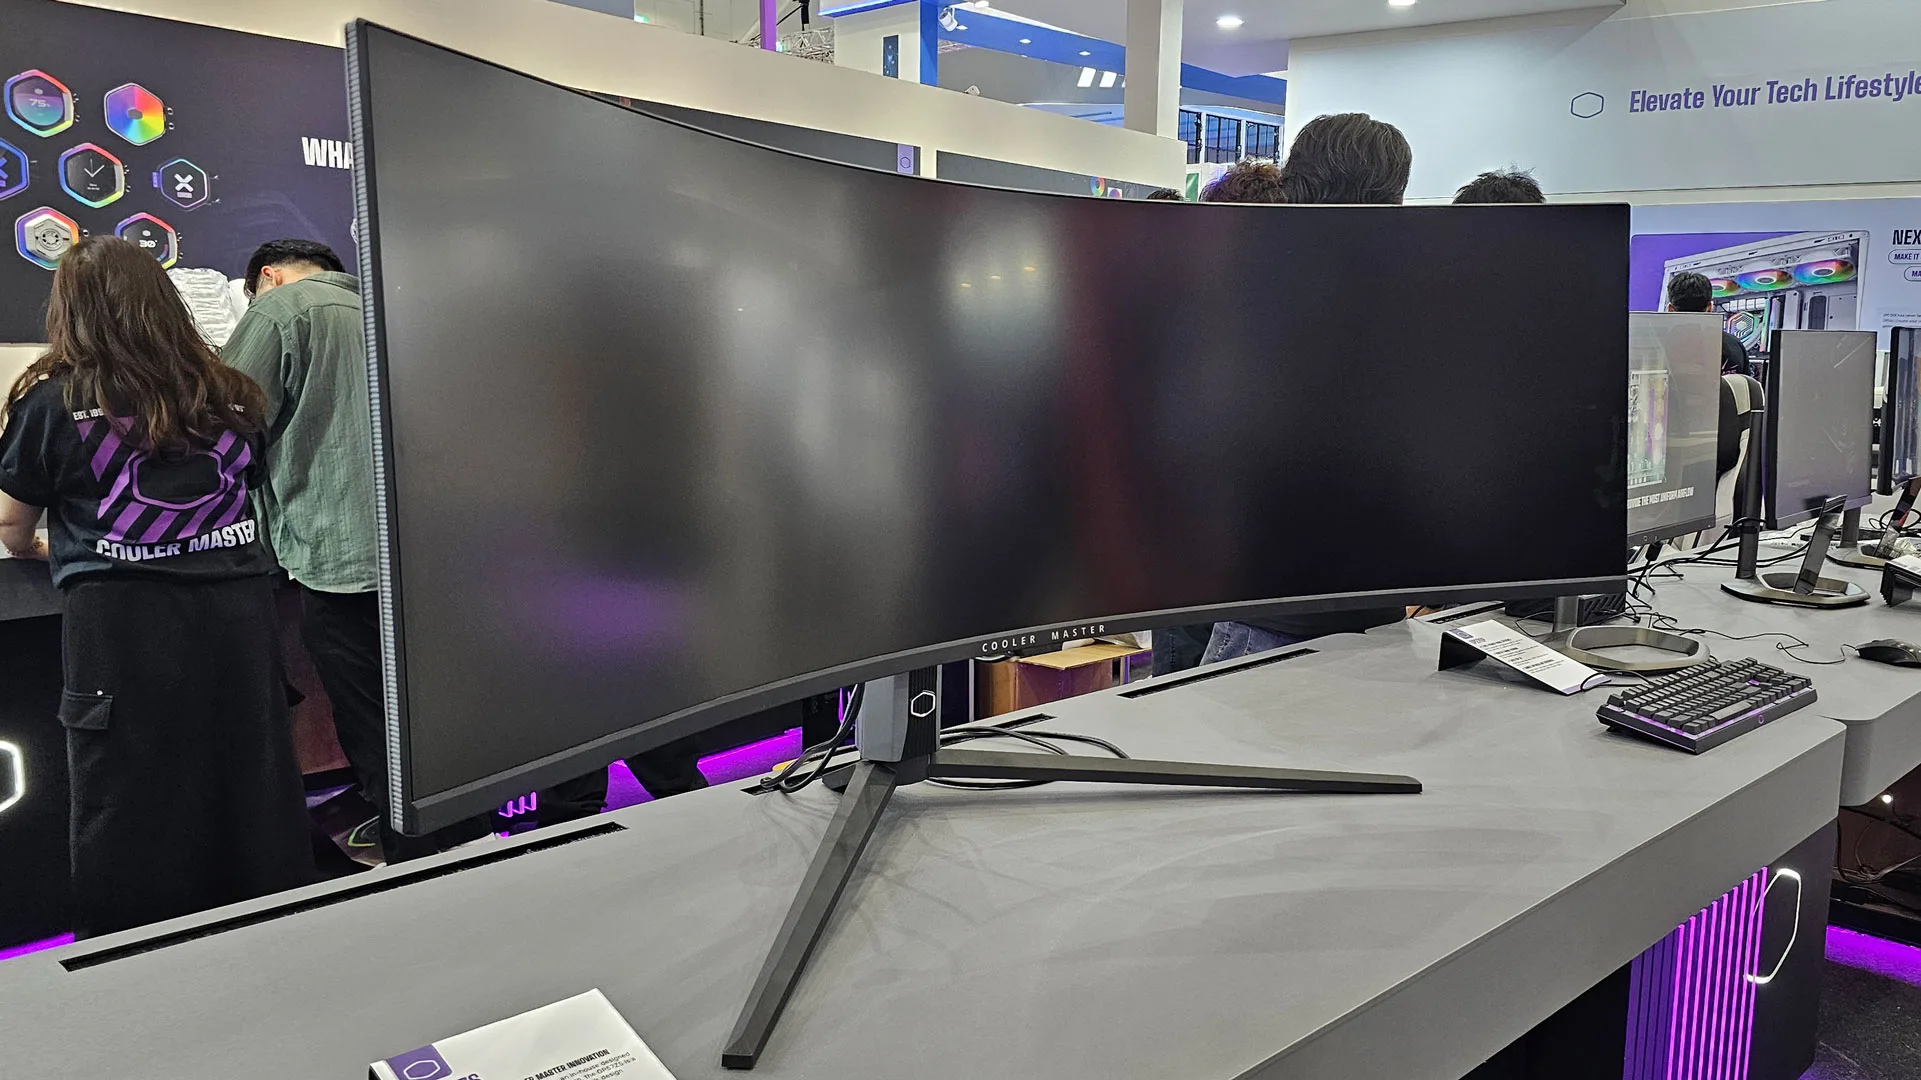 Cooler Master Showcases an Ultra-Wide 57-inch Dual 4K Mini LED Gaming Monitor